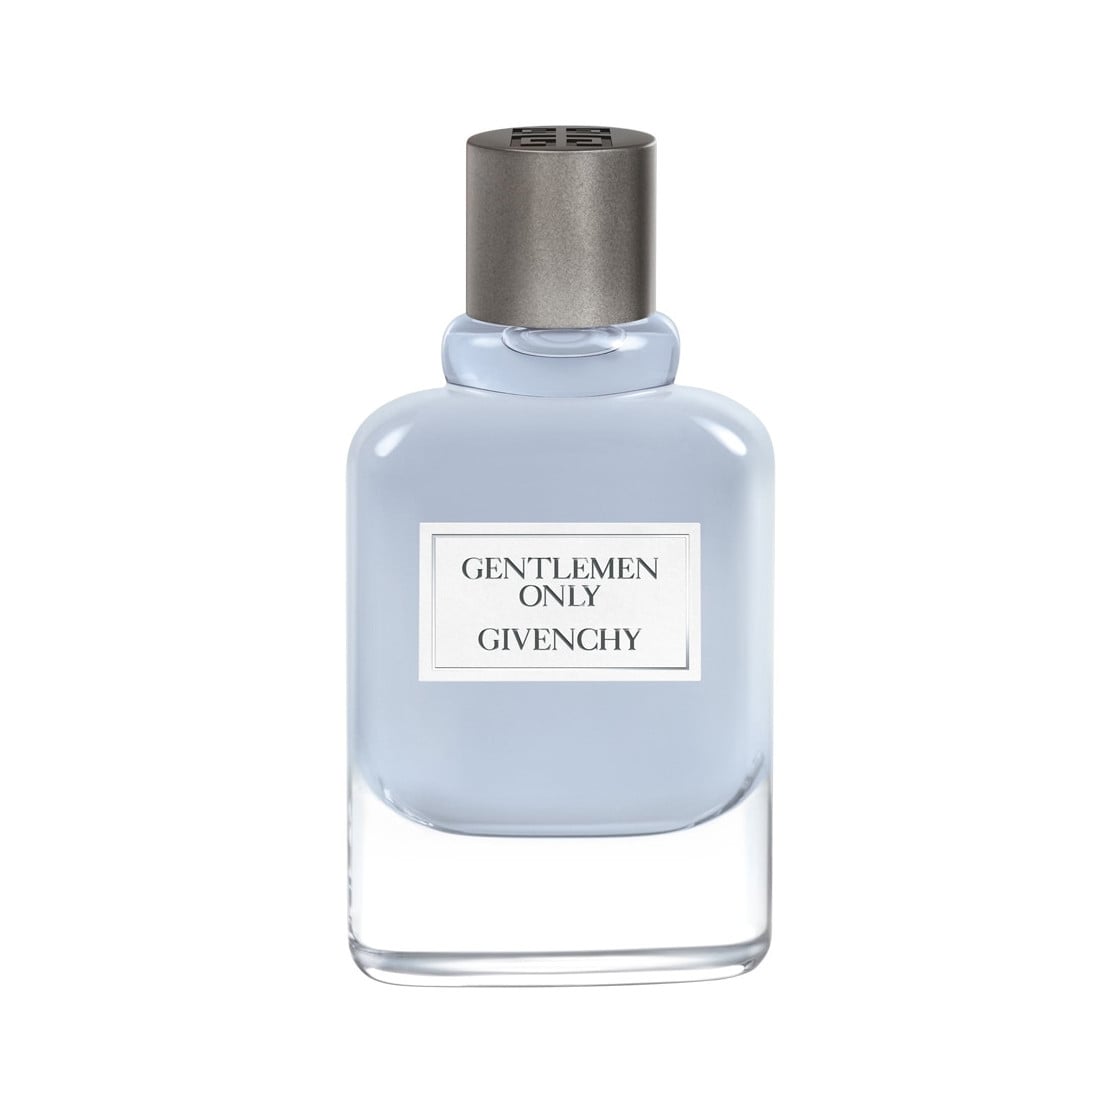 Gentlemen Only EDT Spray Perfume for Men by Givenchy